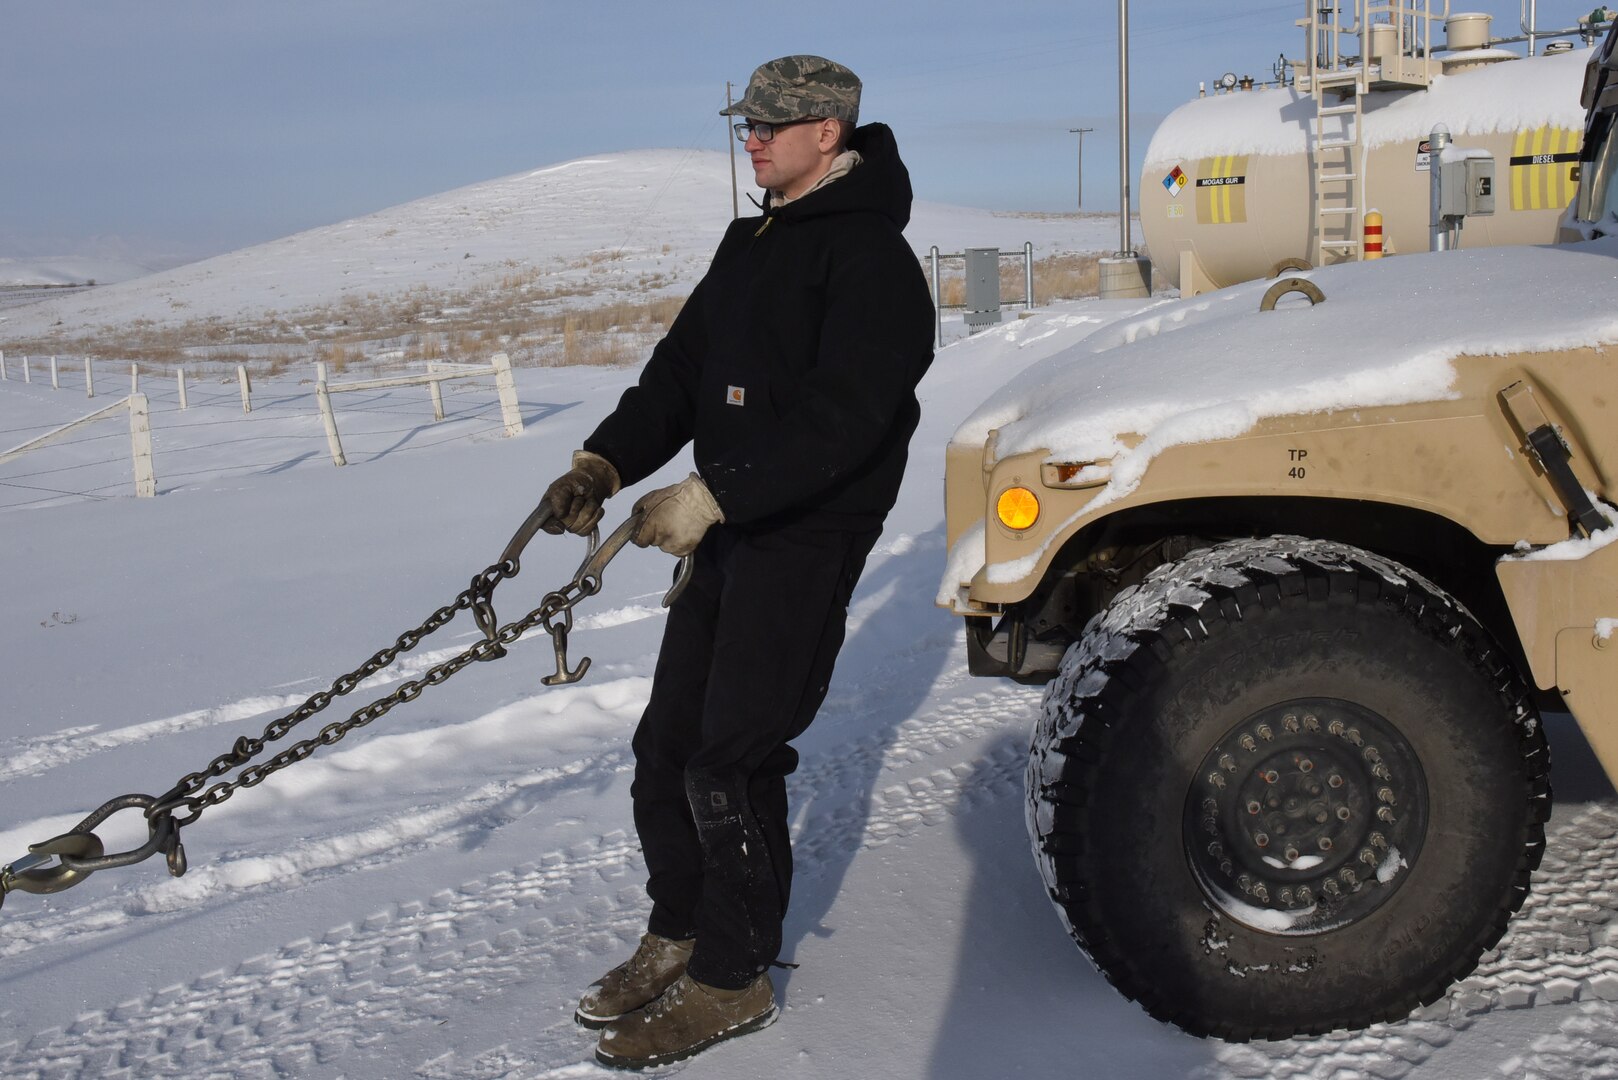 Senior Airman Ian Lauzon, 341st Logistics Readiness Squadron vehicle operator, prepares to connect towing cables to a Humvee at a missile alert facility Feb. 7, 2017.  The Humvee will be towed to Malmstrom Air Force Base, Mont., for maintenance.  (U.S. Air Force photo/Jason Heavner)           